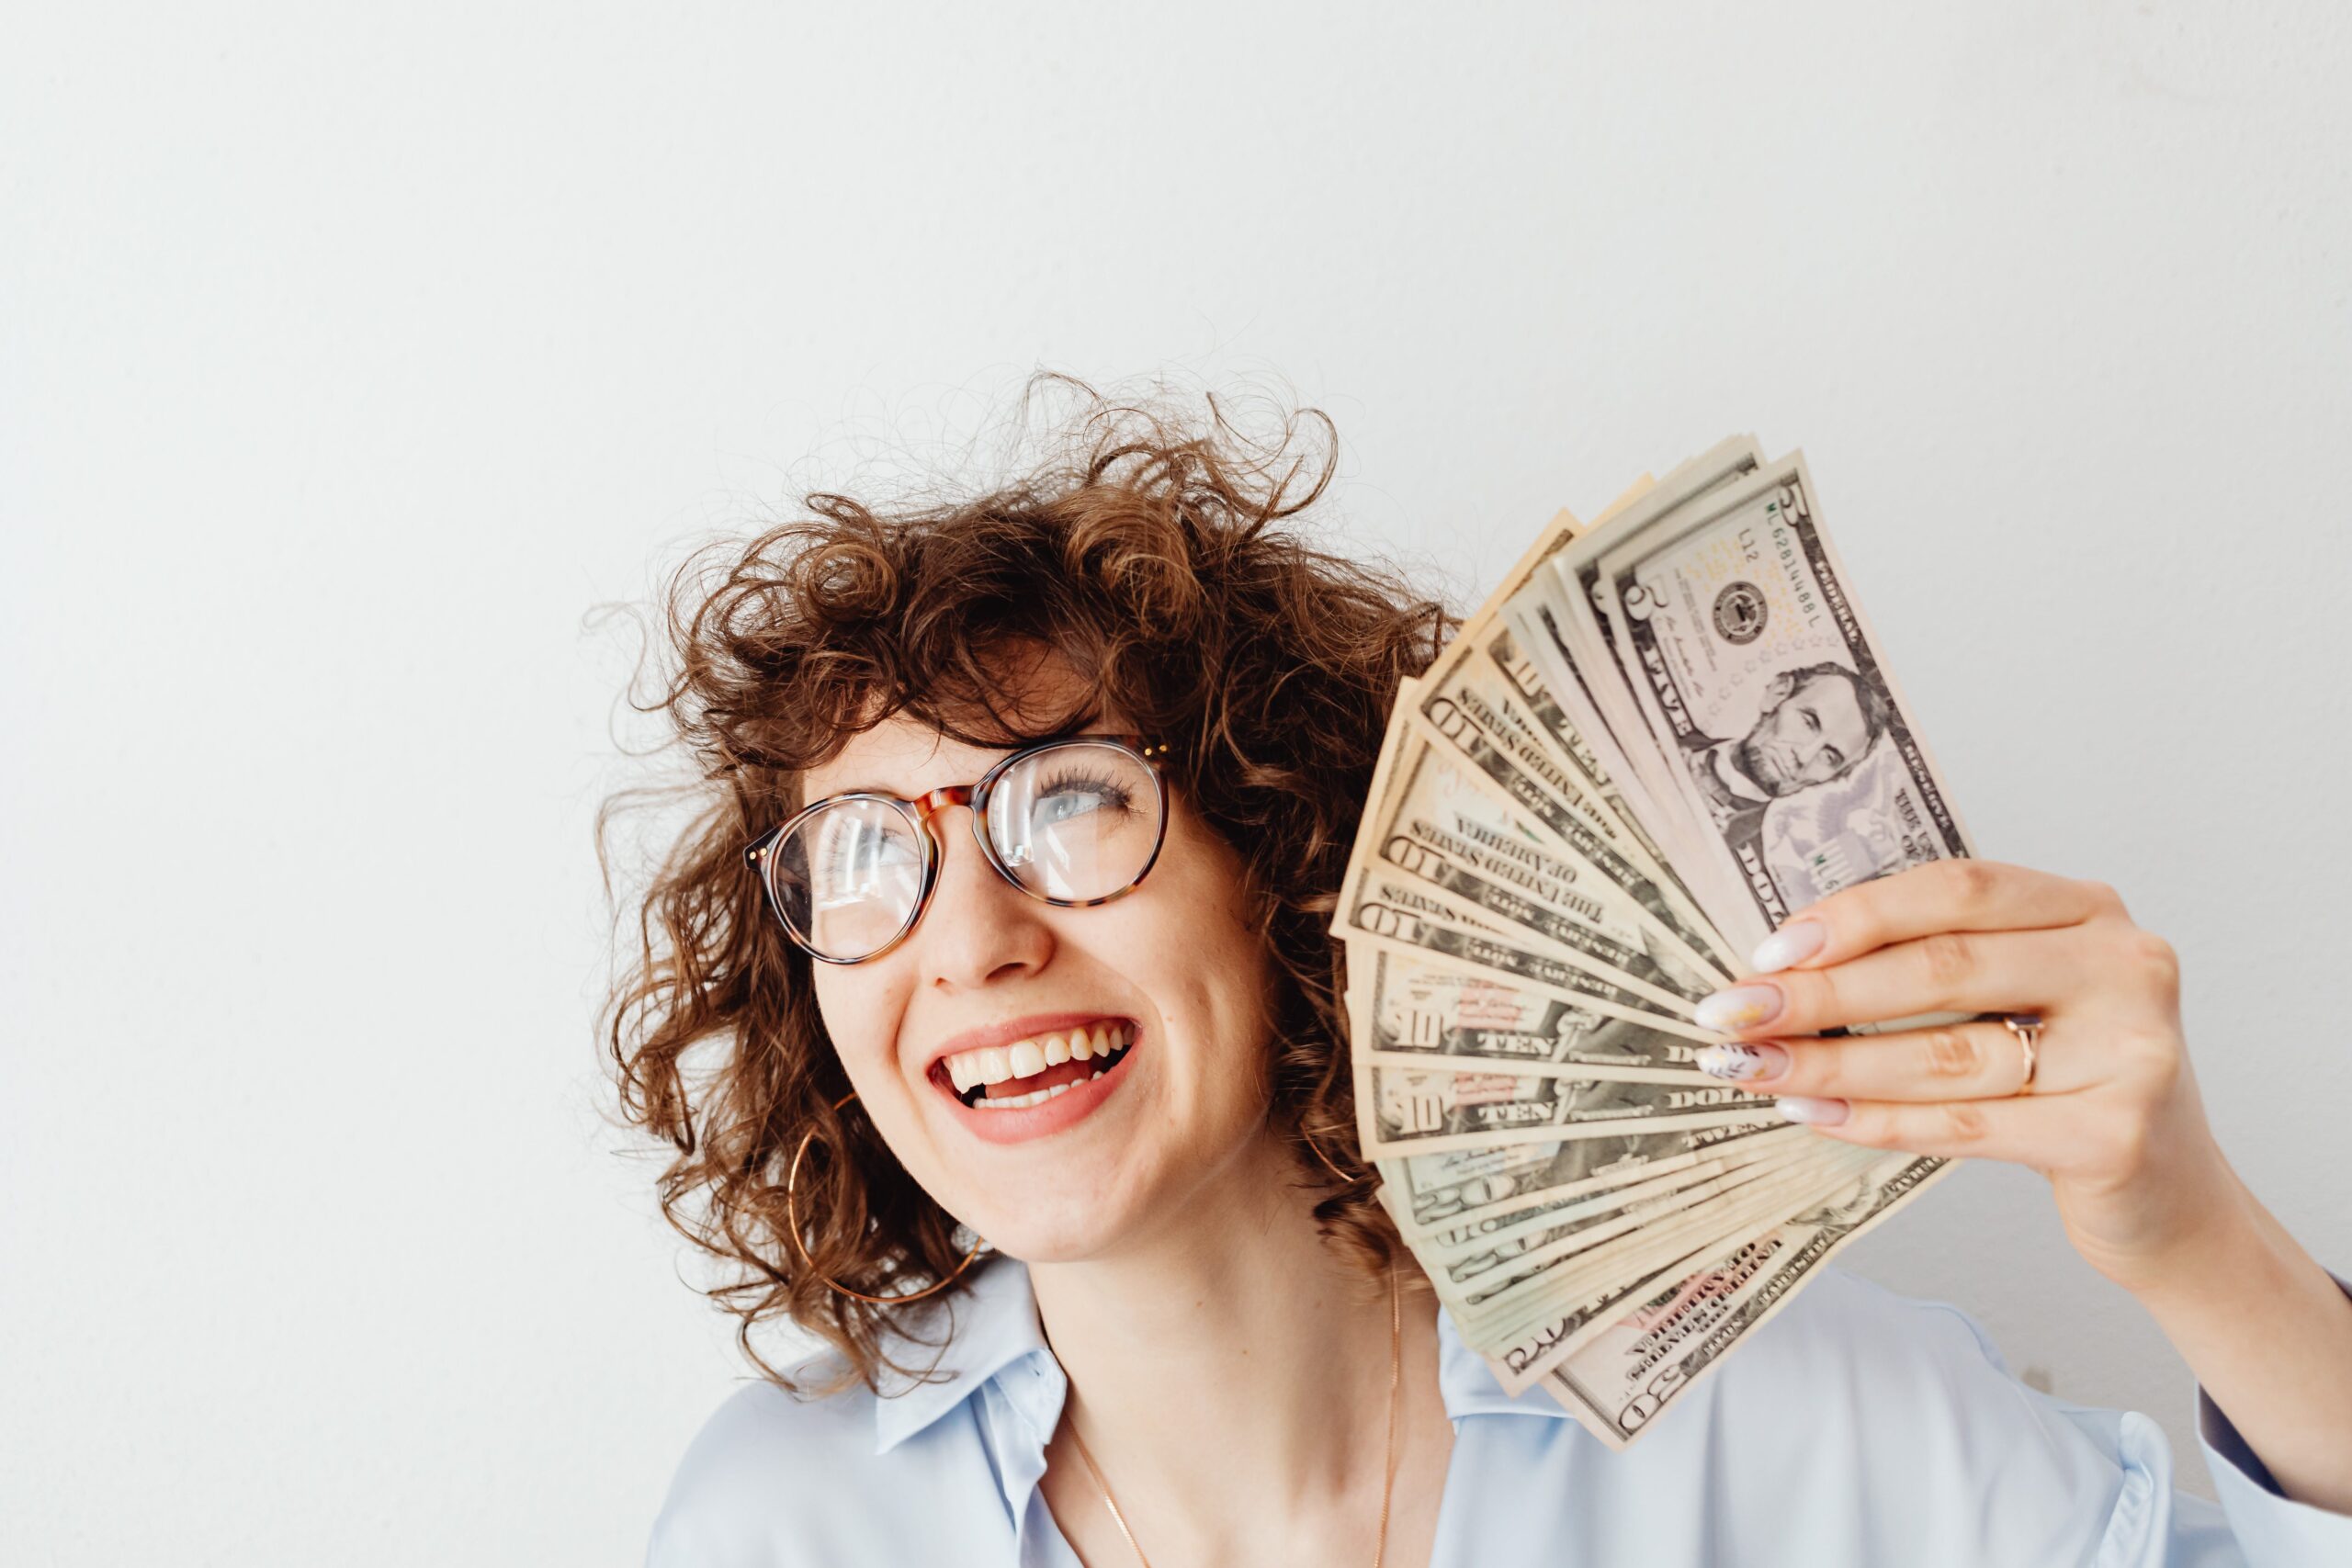 A woman smiling while flaunting her dollar bills